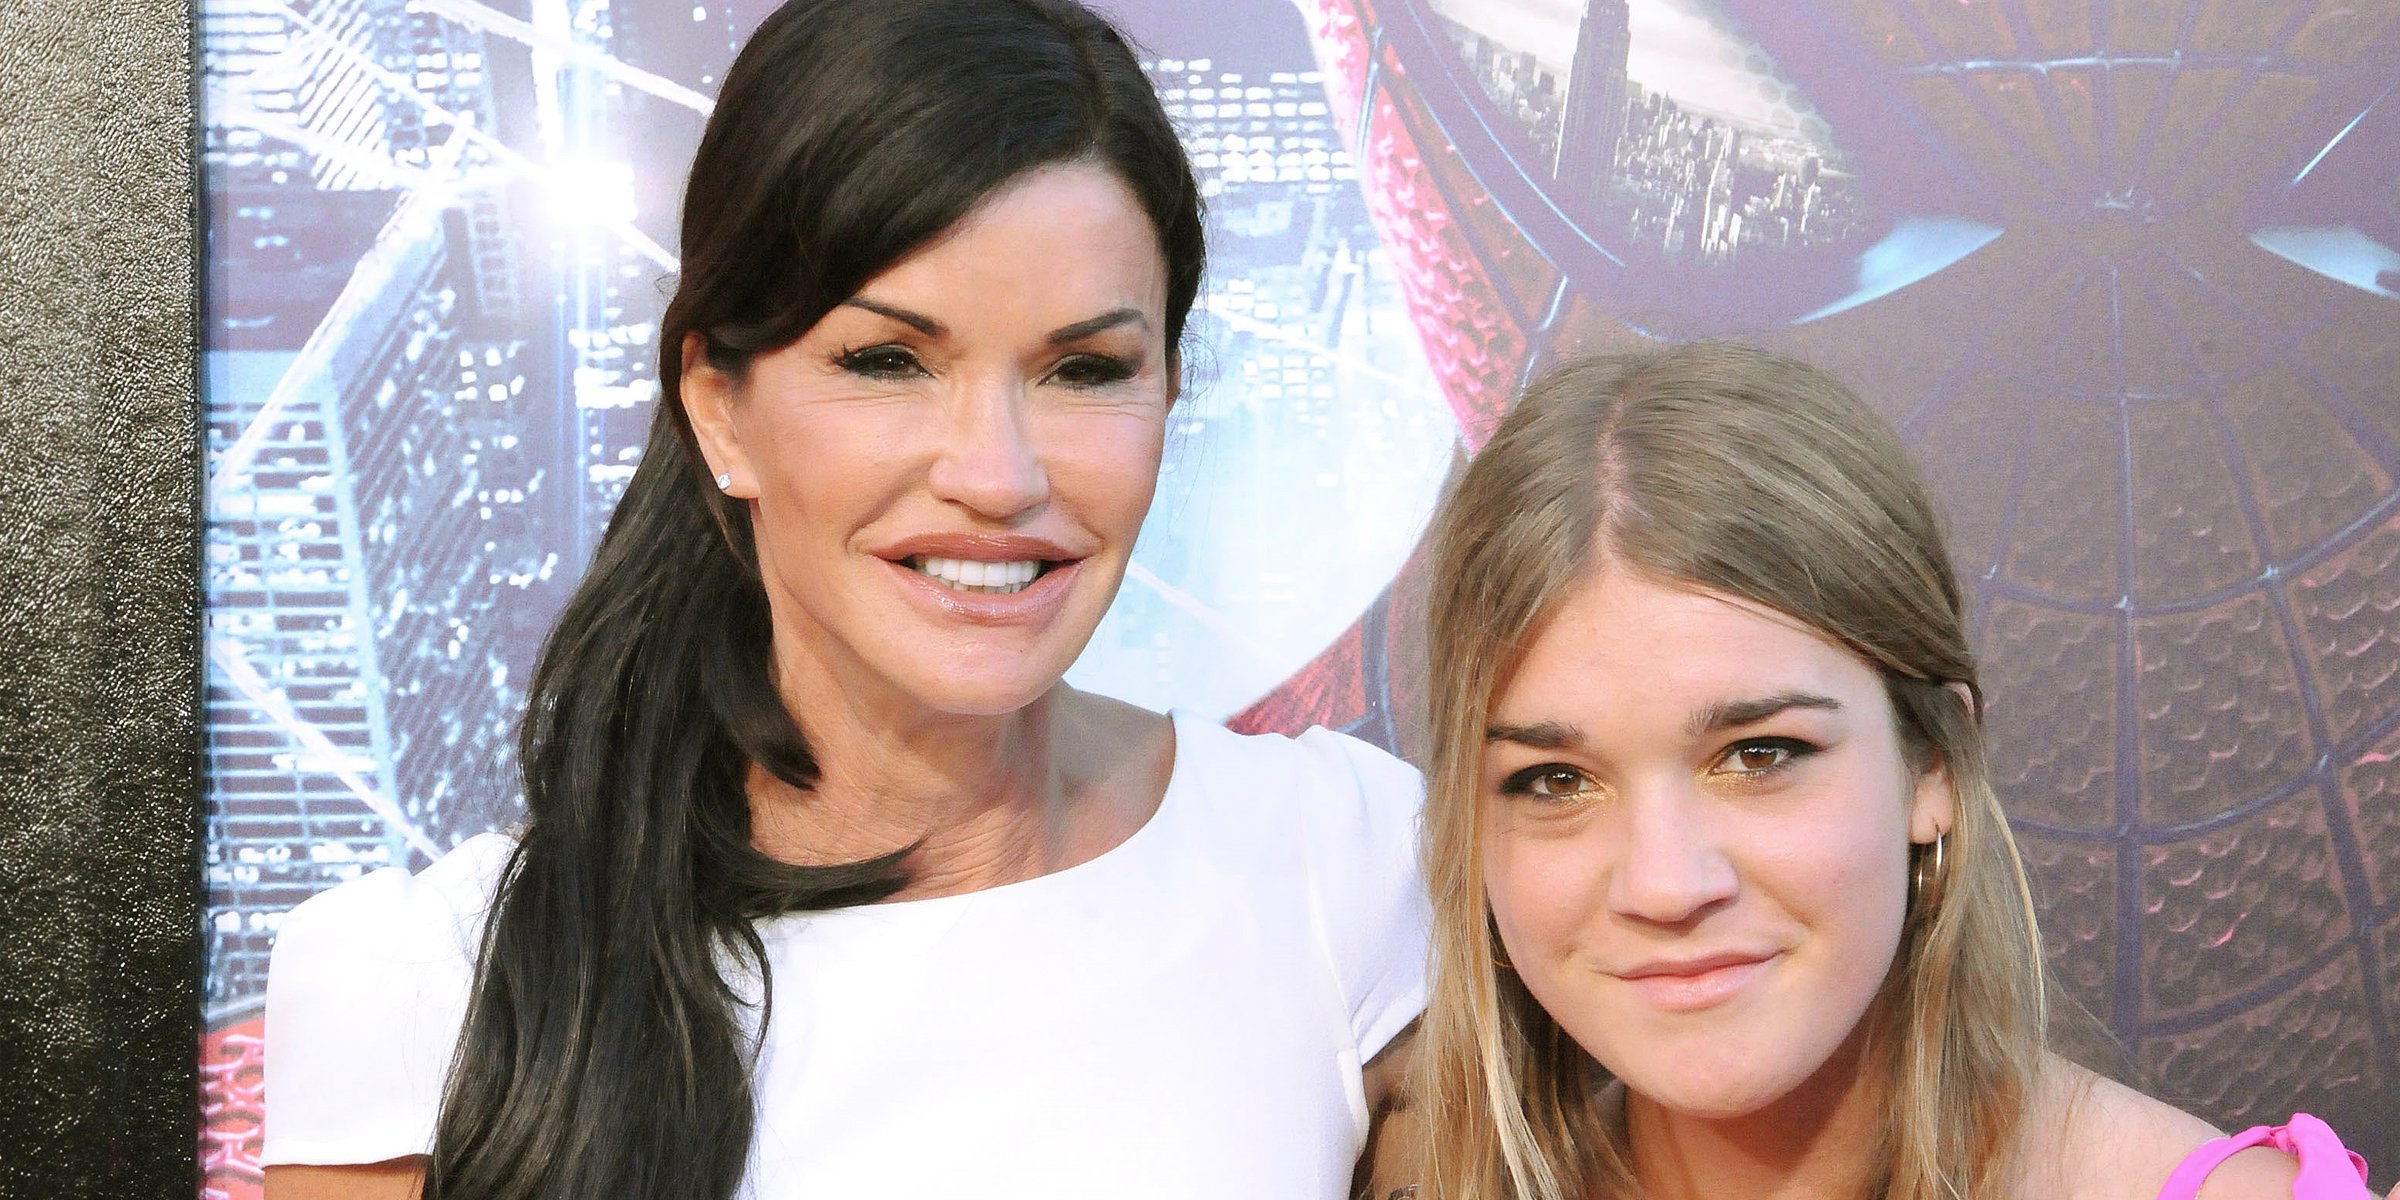 Janice Dickinson and Savannah Dickinson, 2012 | Source: Getty images